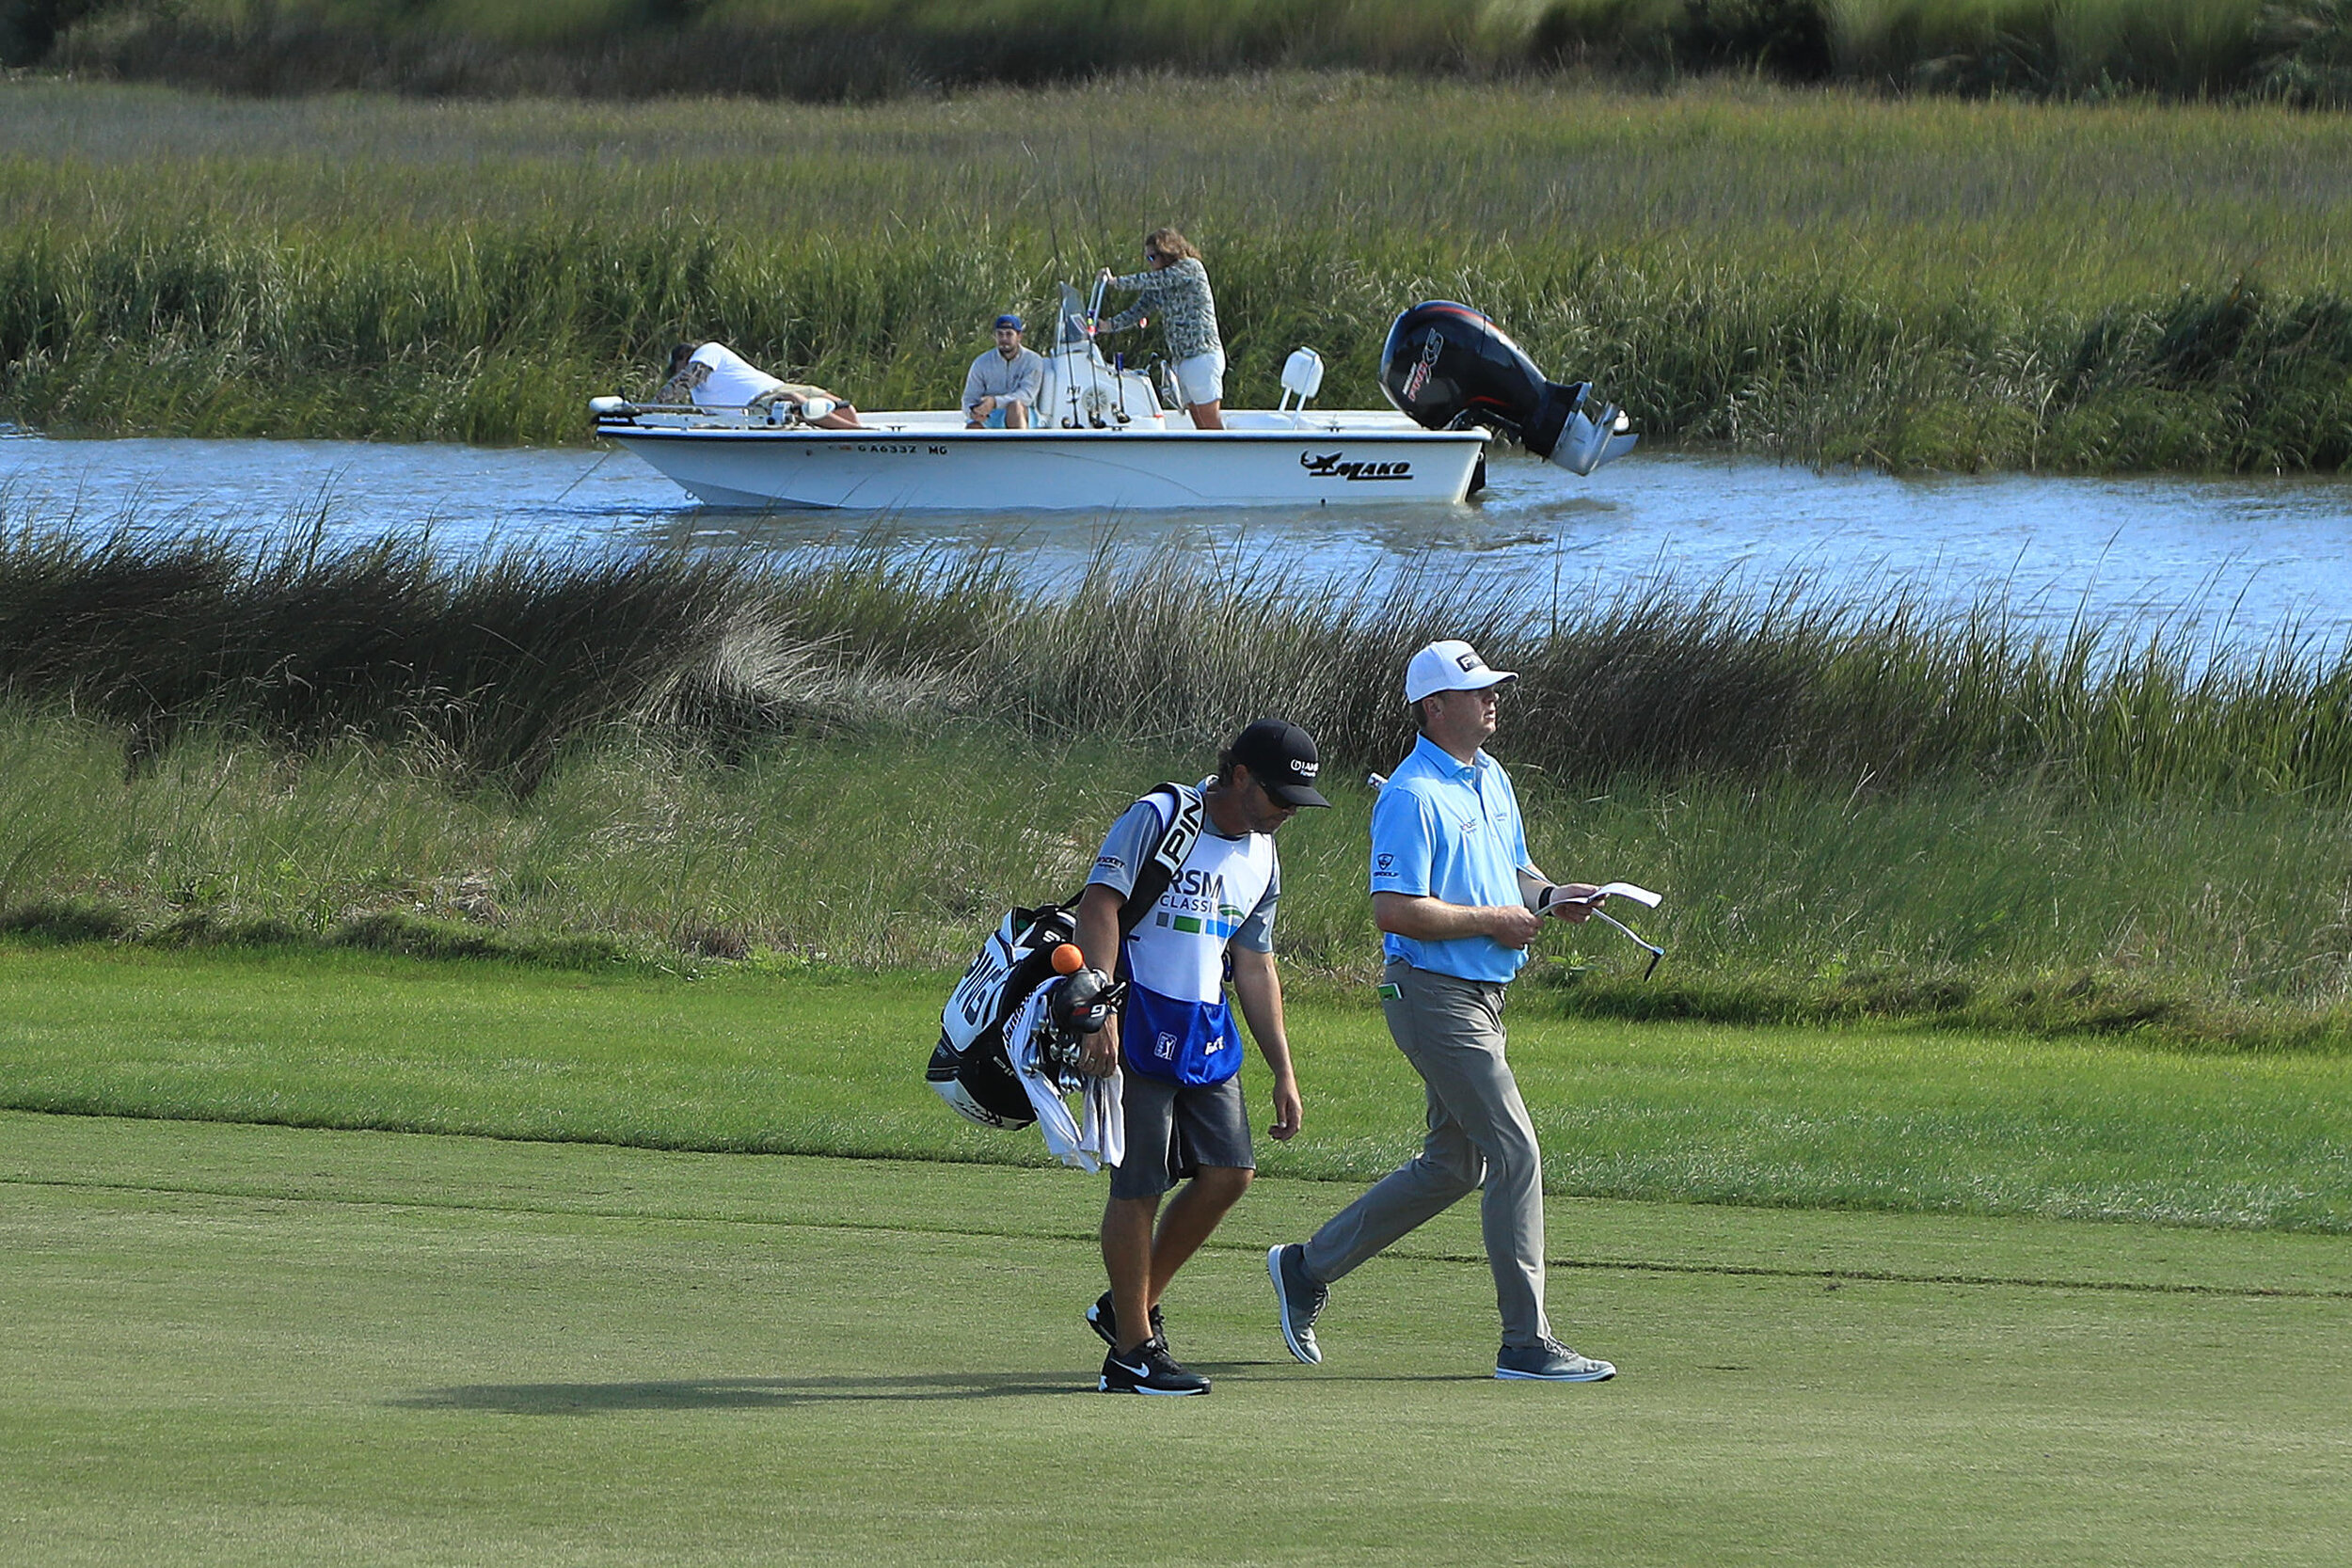  ST SIMONS ISLAND, GEORGIA - NOVEMBER 21: Nate Lashley of the United States and his caddie walk the 13th hole during the third round of The RSM Classic at the Seaside Course at Sea Island Golf Club on November 21, 2020 in St Simons Island, Georgia. (